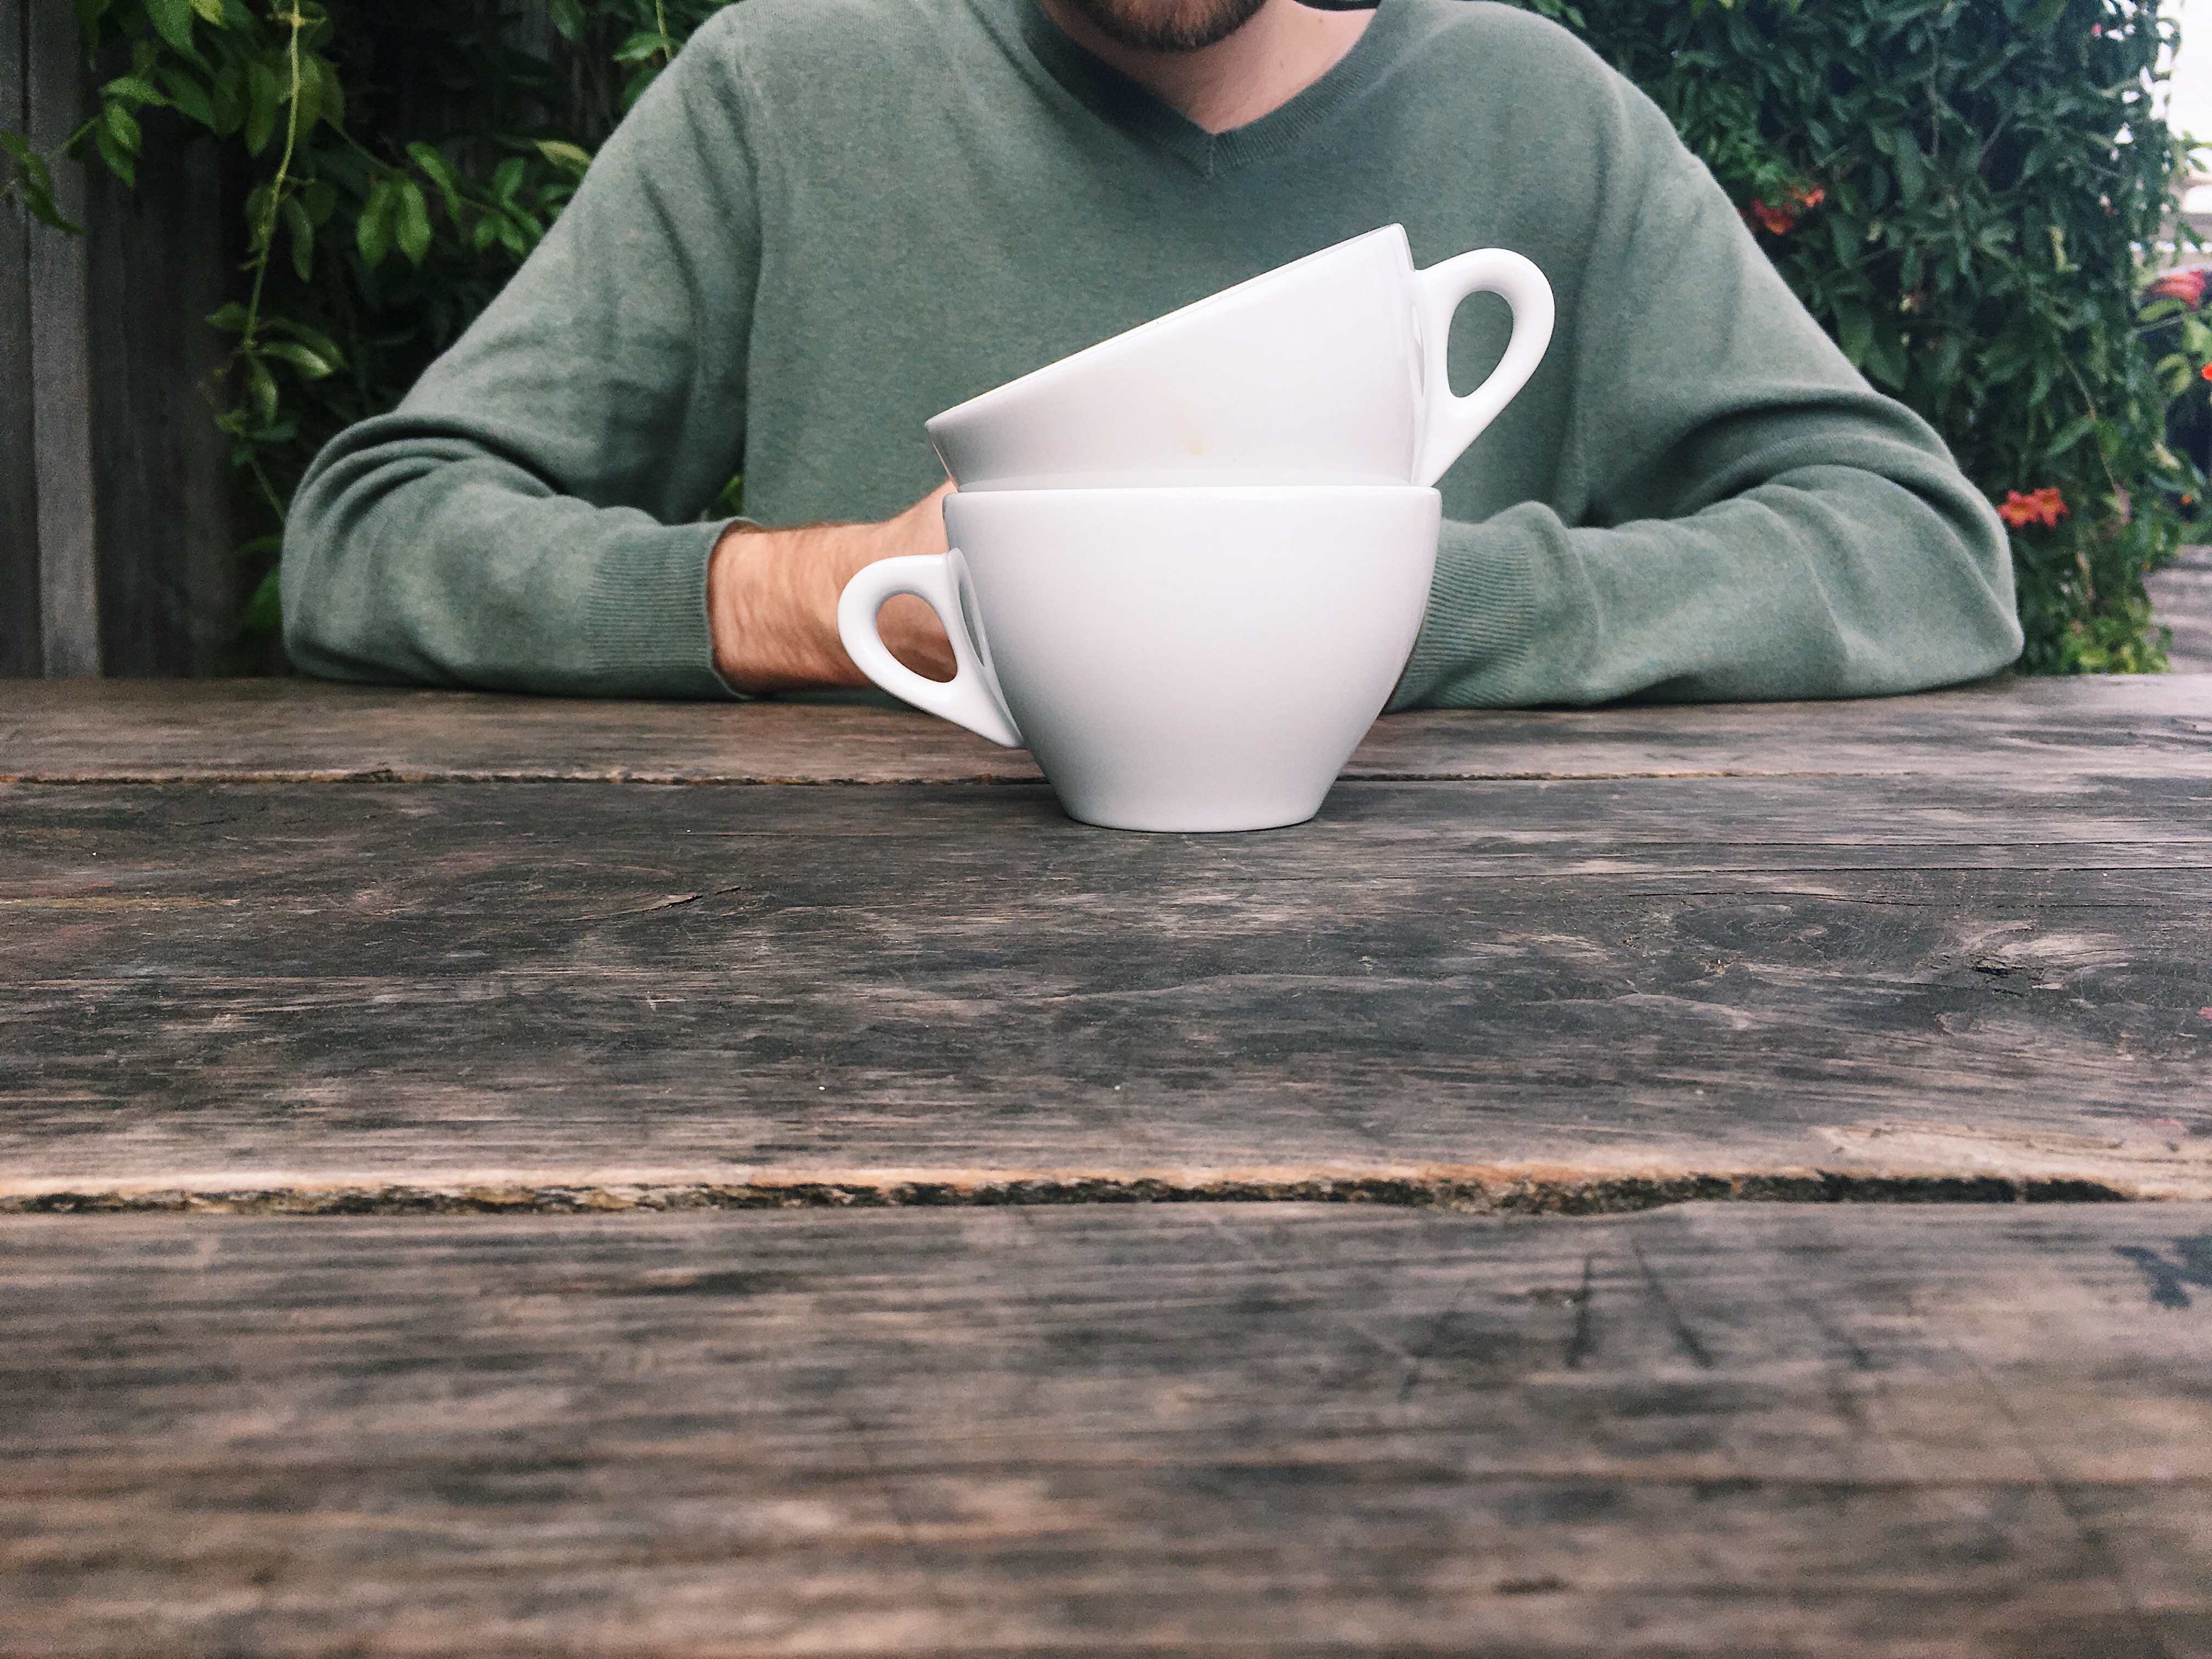 A man in a green sweater sitting behind two stacked coffee mugs.